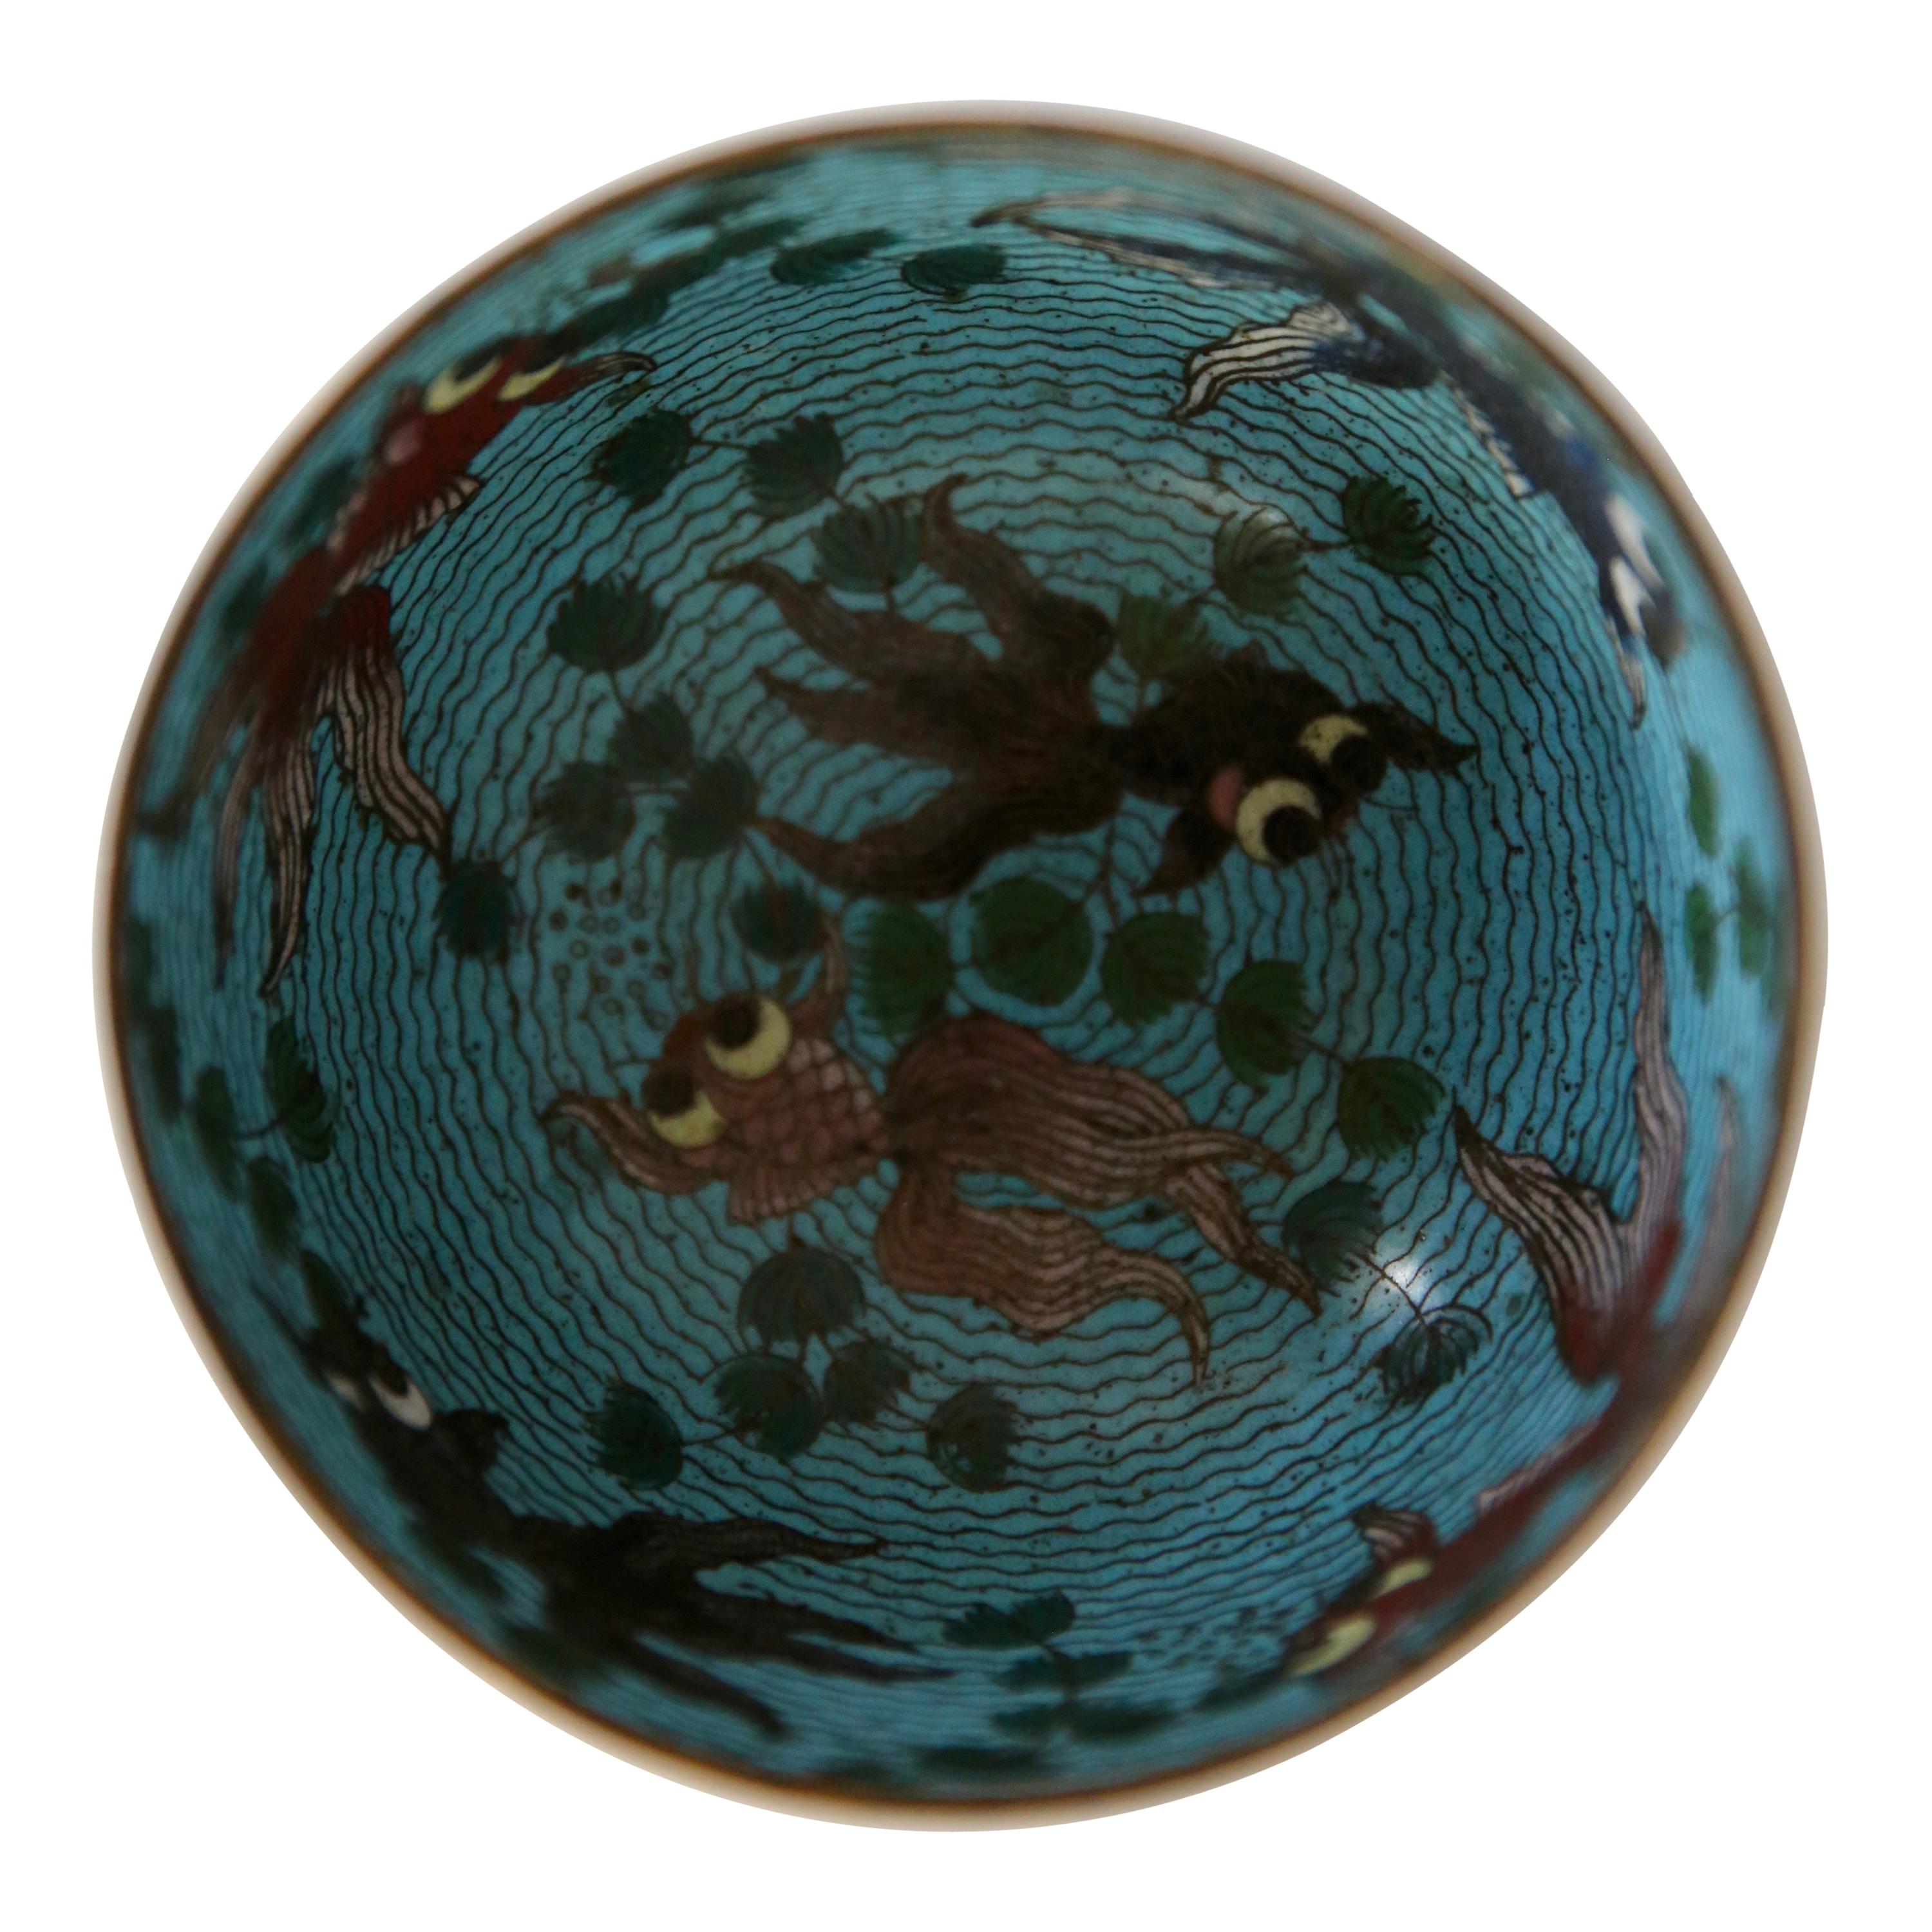 Precious 19th century bronze cloisonné bowl.
Beautiful decor and colors.
Red and black fishes in water decor inside.
Dimensions: 11.5 cm diameter x 6.5 cm H and 9.5 cm H with its wooden display.